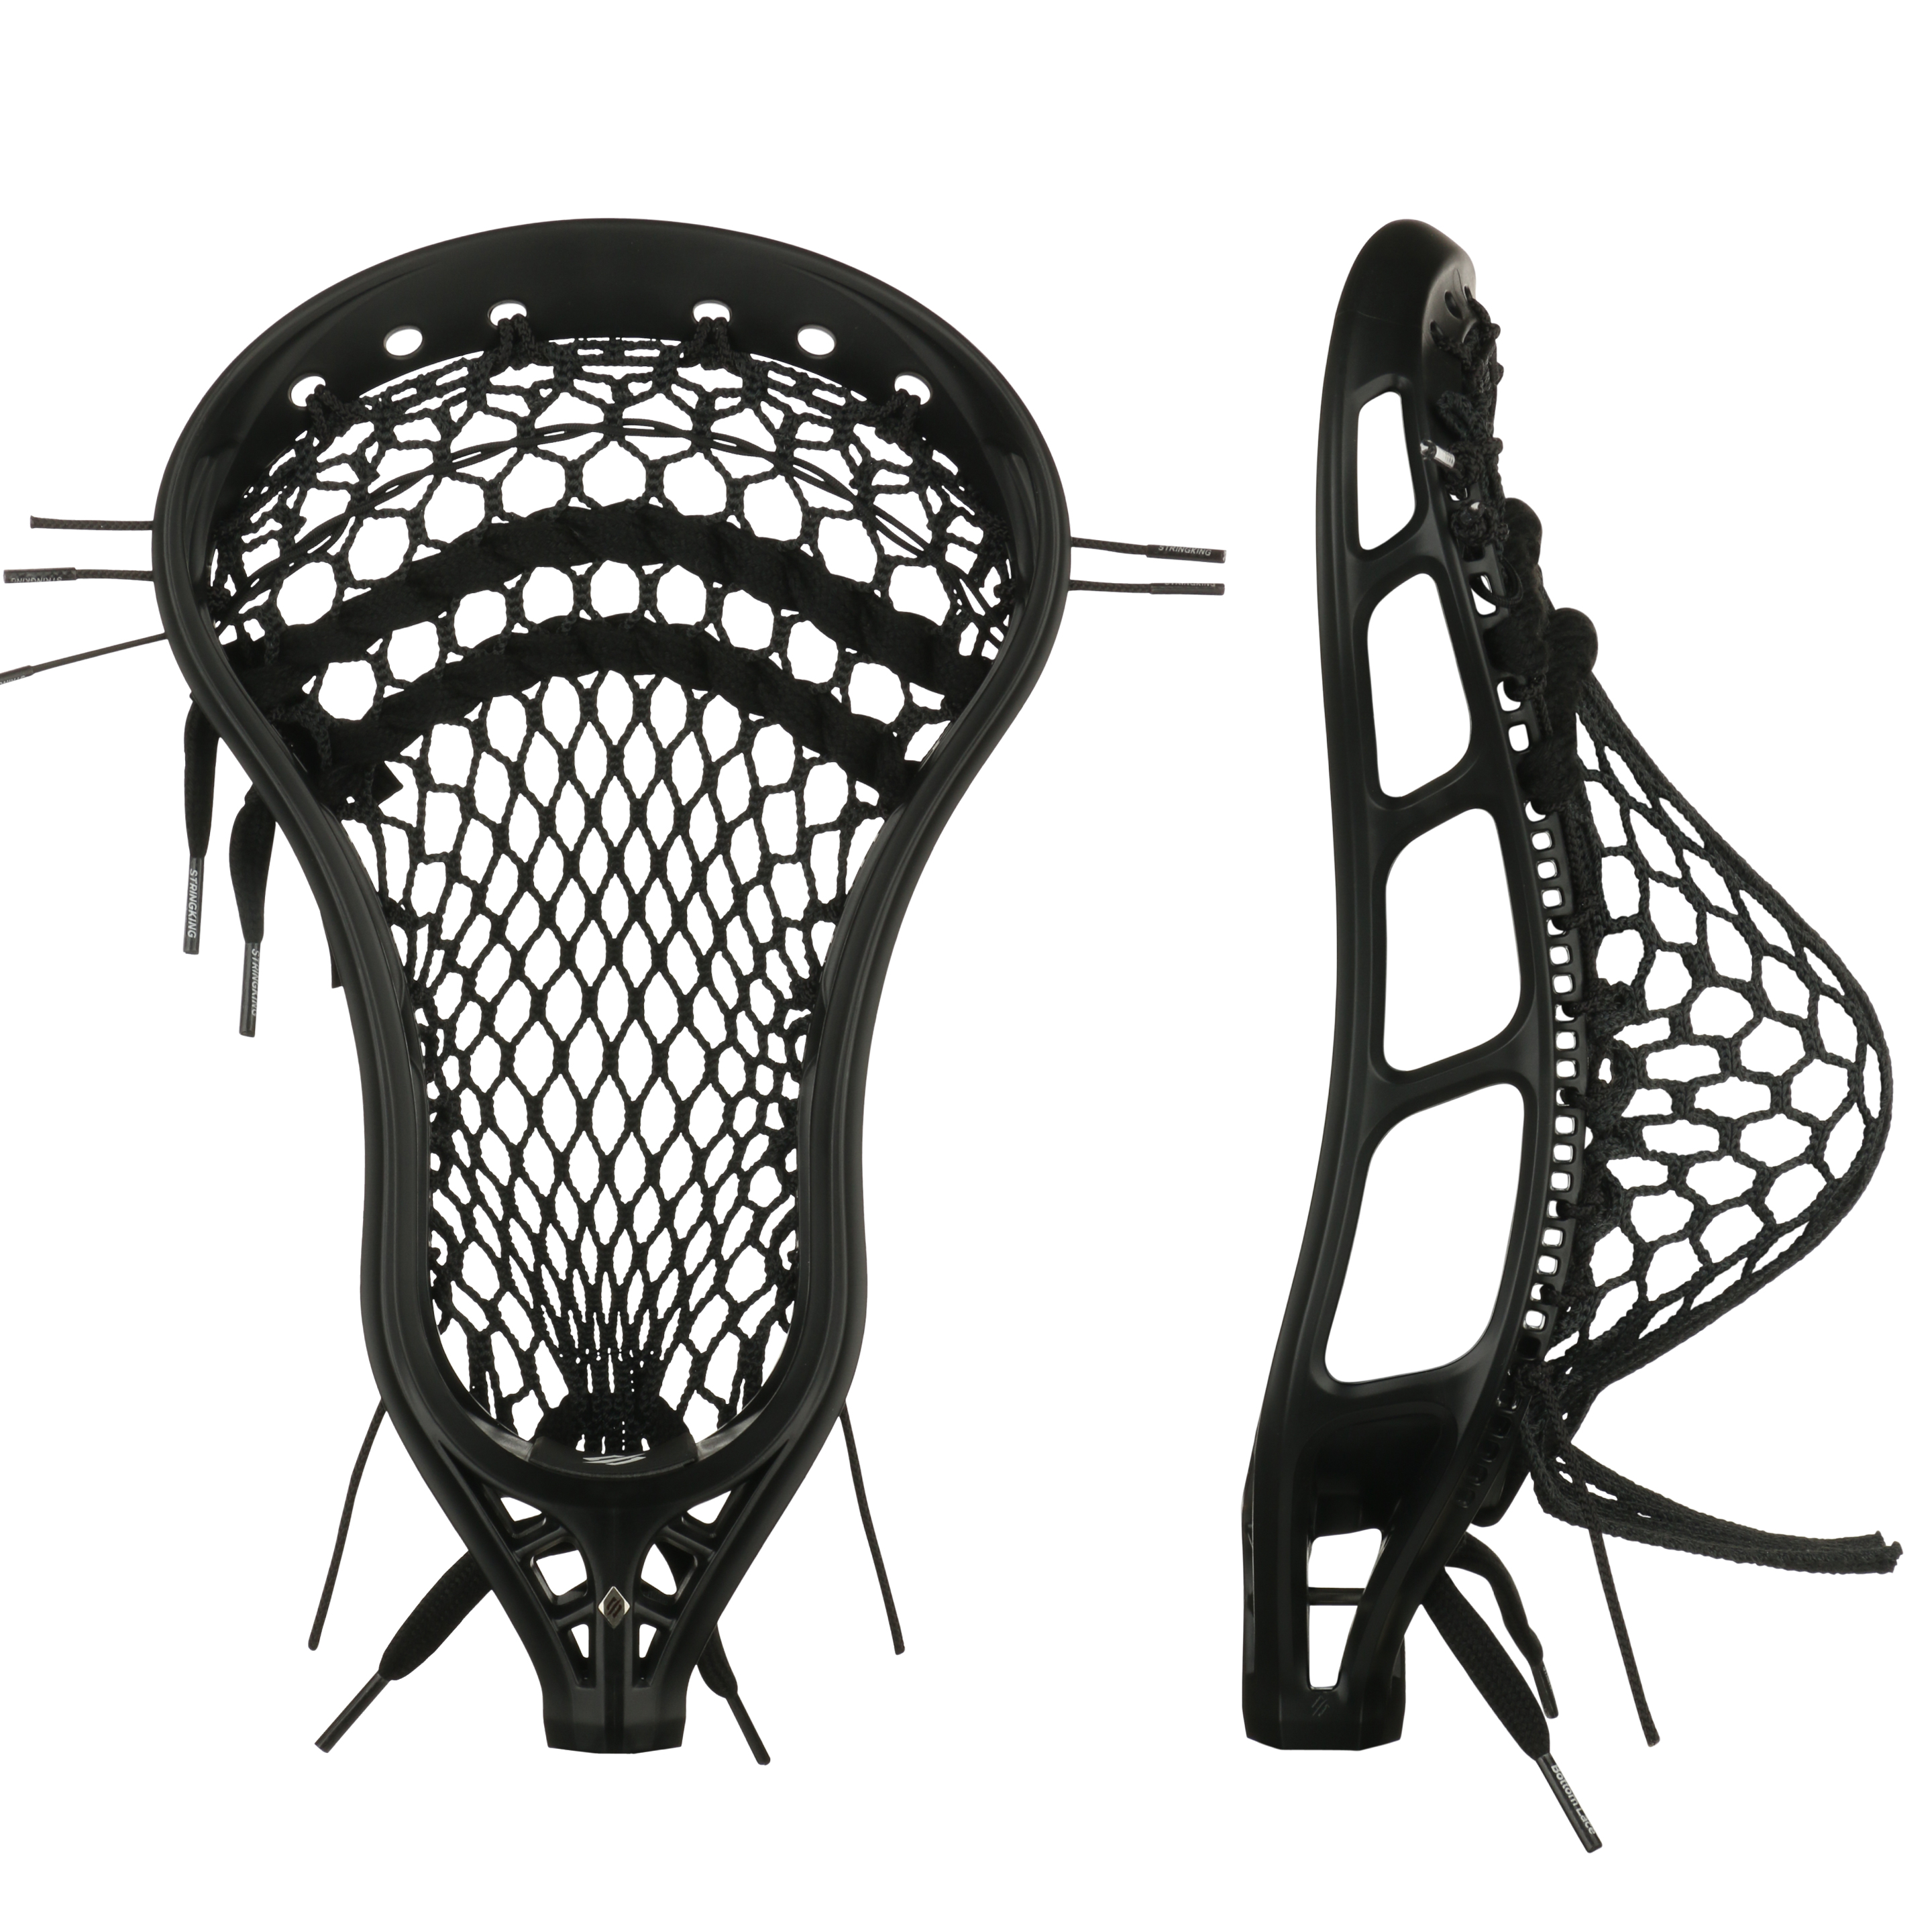 Stringking Mark 2A Strung | Lowest Price Guaranteed